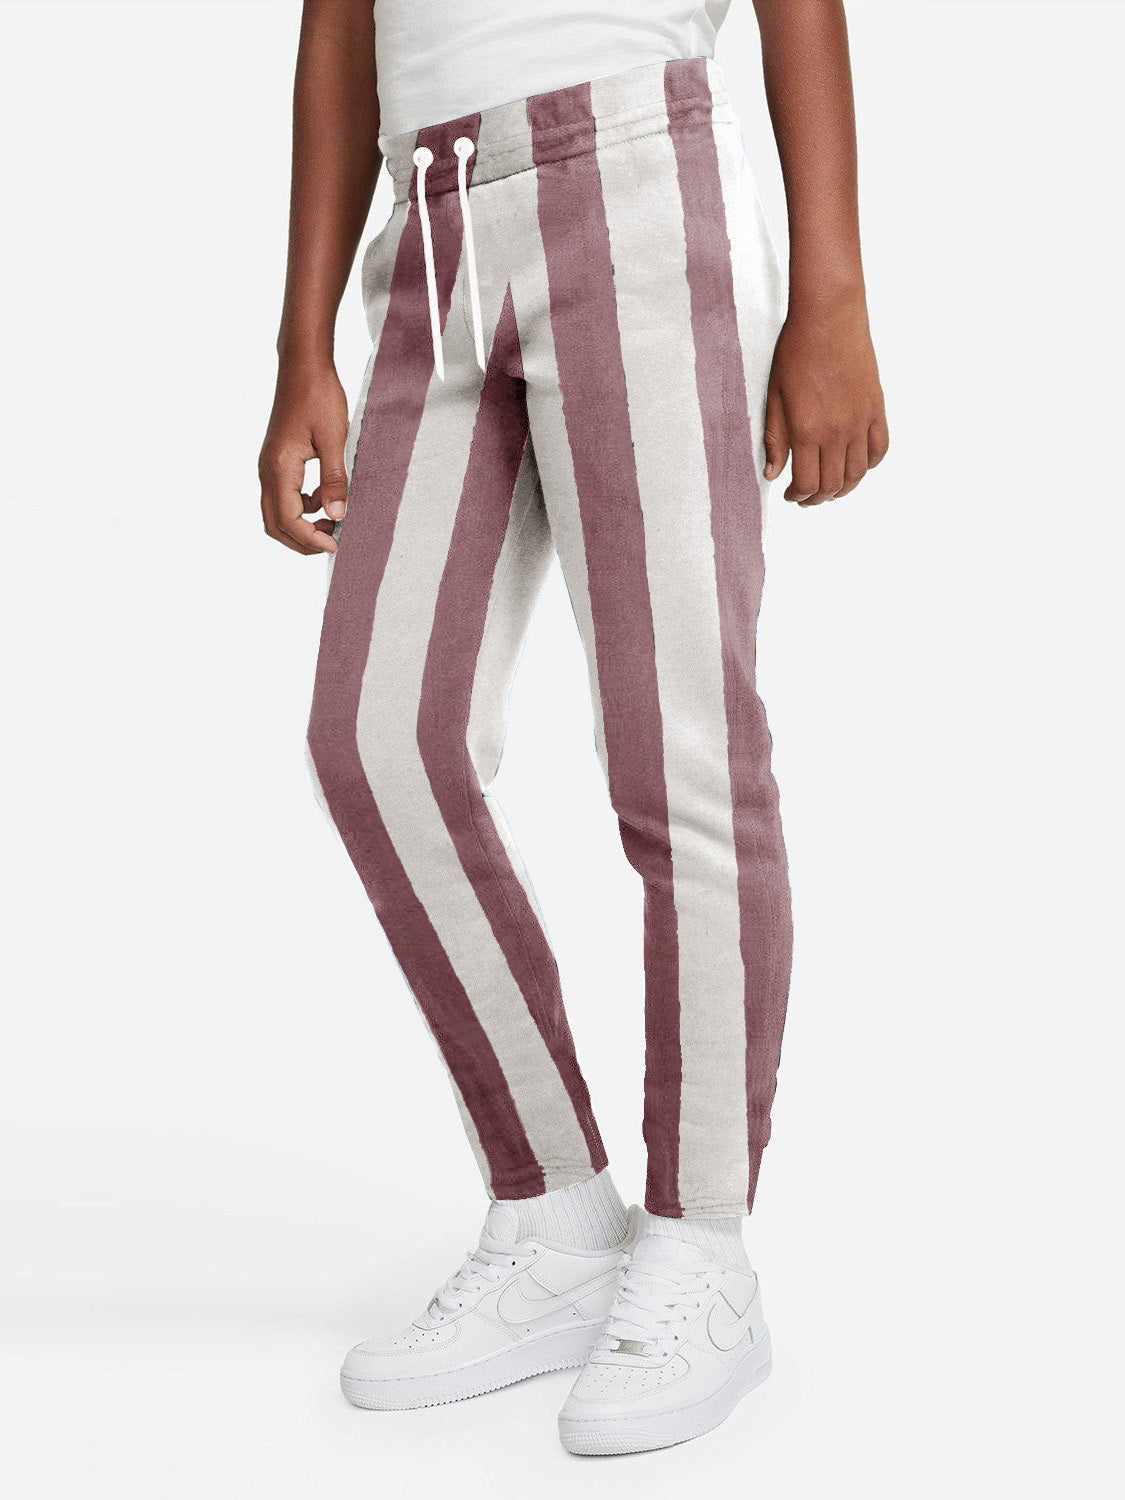 George Single Jersey Trouser For Kids-Off White with Maroon Stripes-SP912